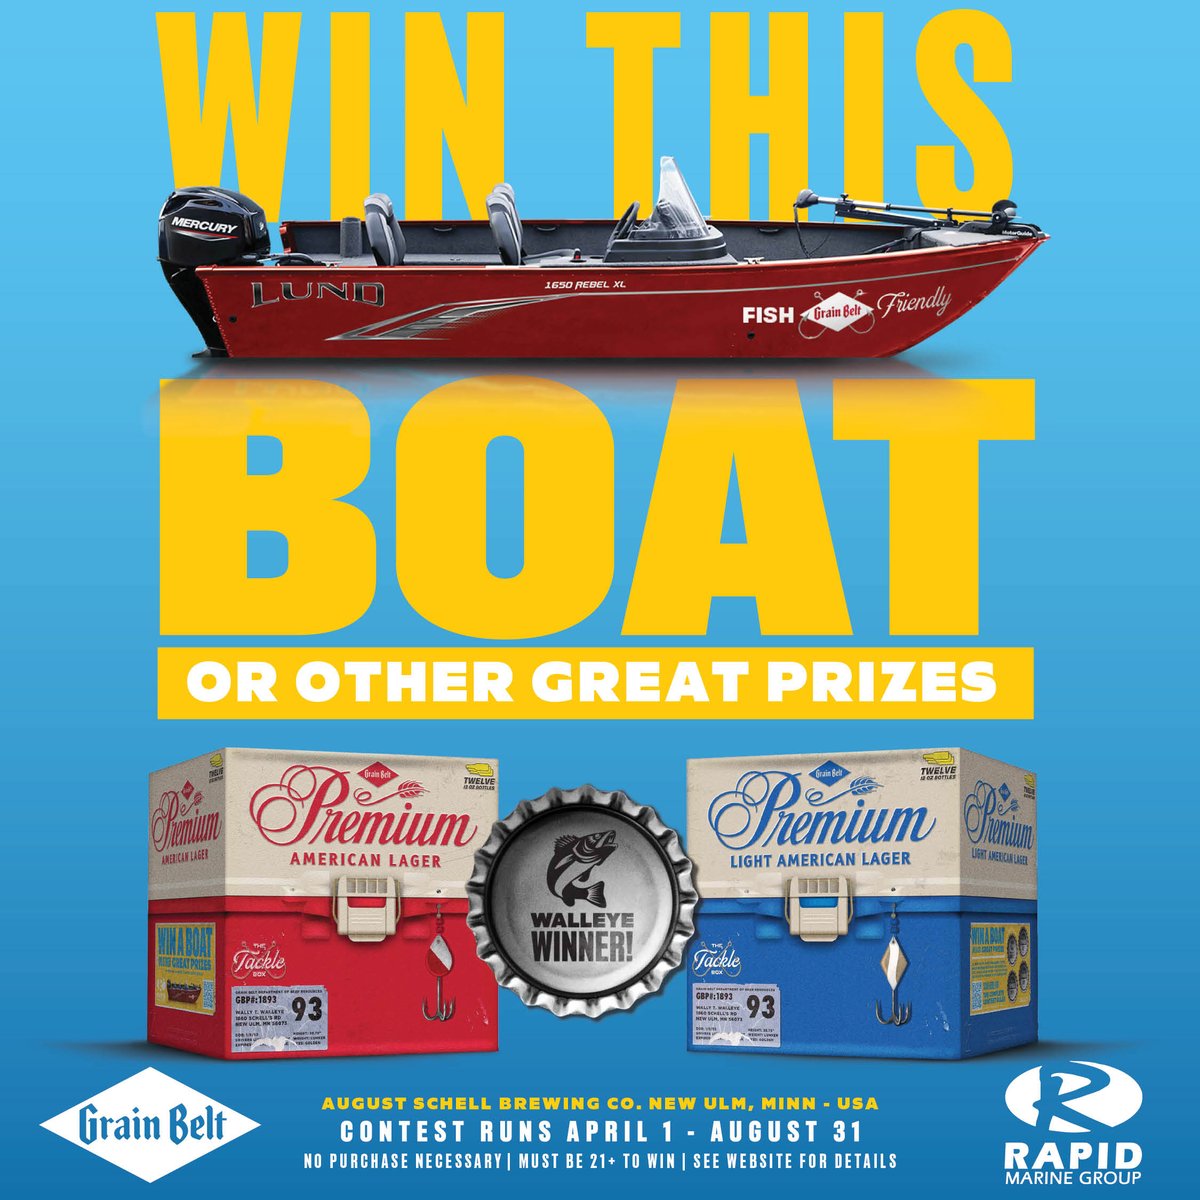 Here's your chance to reel in the big one! Step aboard by snagging Premium and Premium Light limited-edition fishing beer bottles. Don't miss your chance to win awesome prizes, including a new boat from Grain Belt and Rapid Marine!